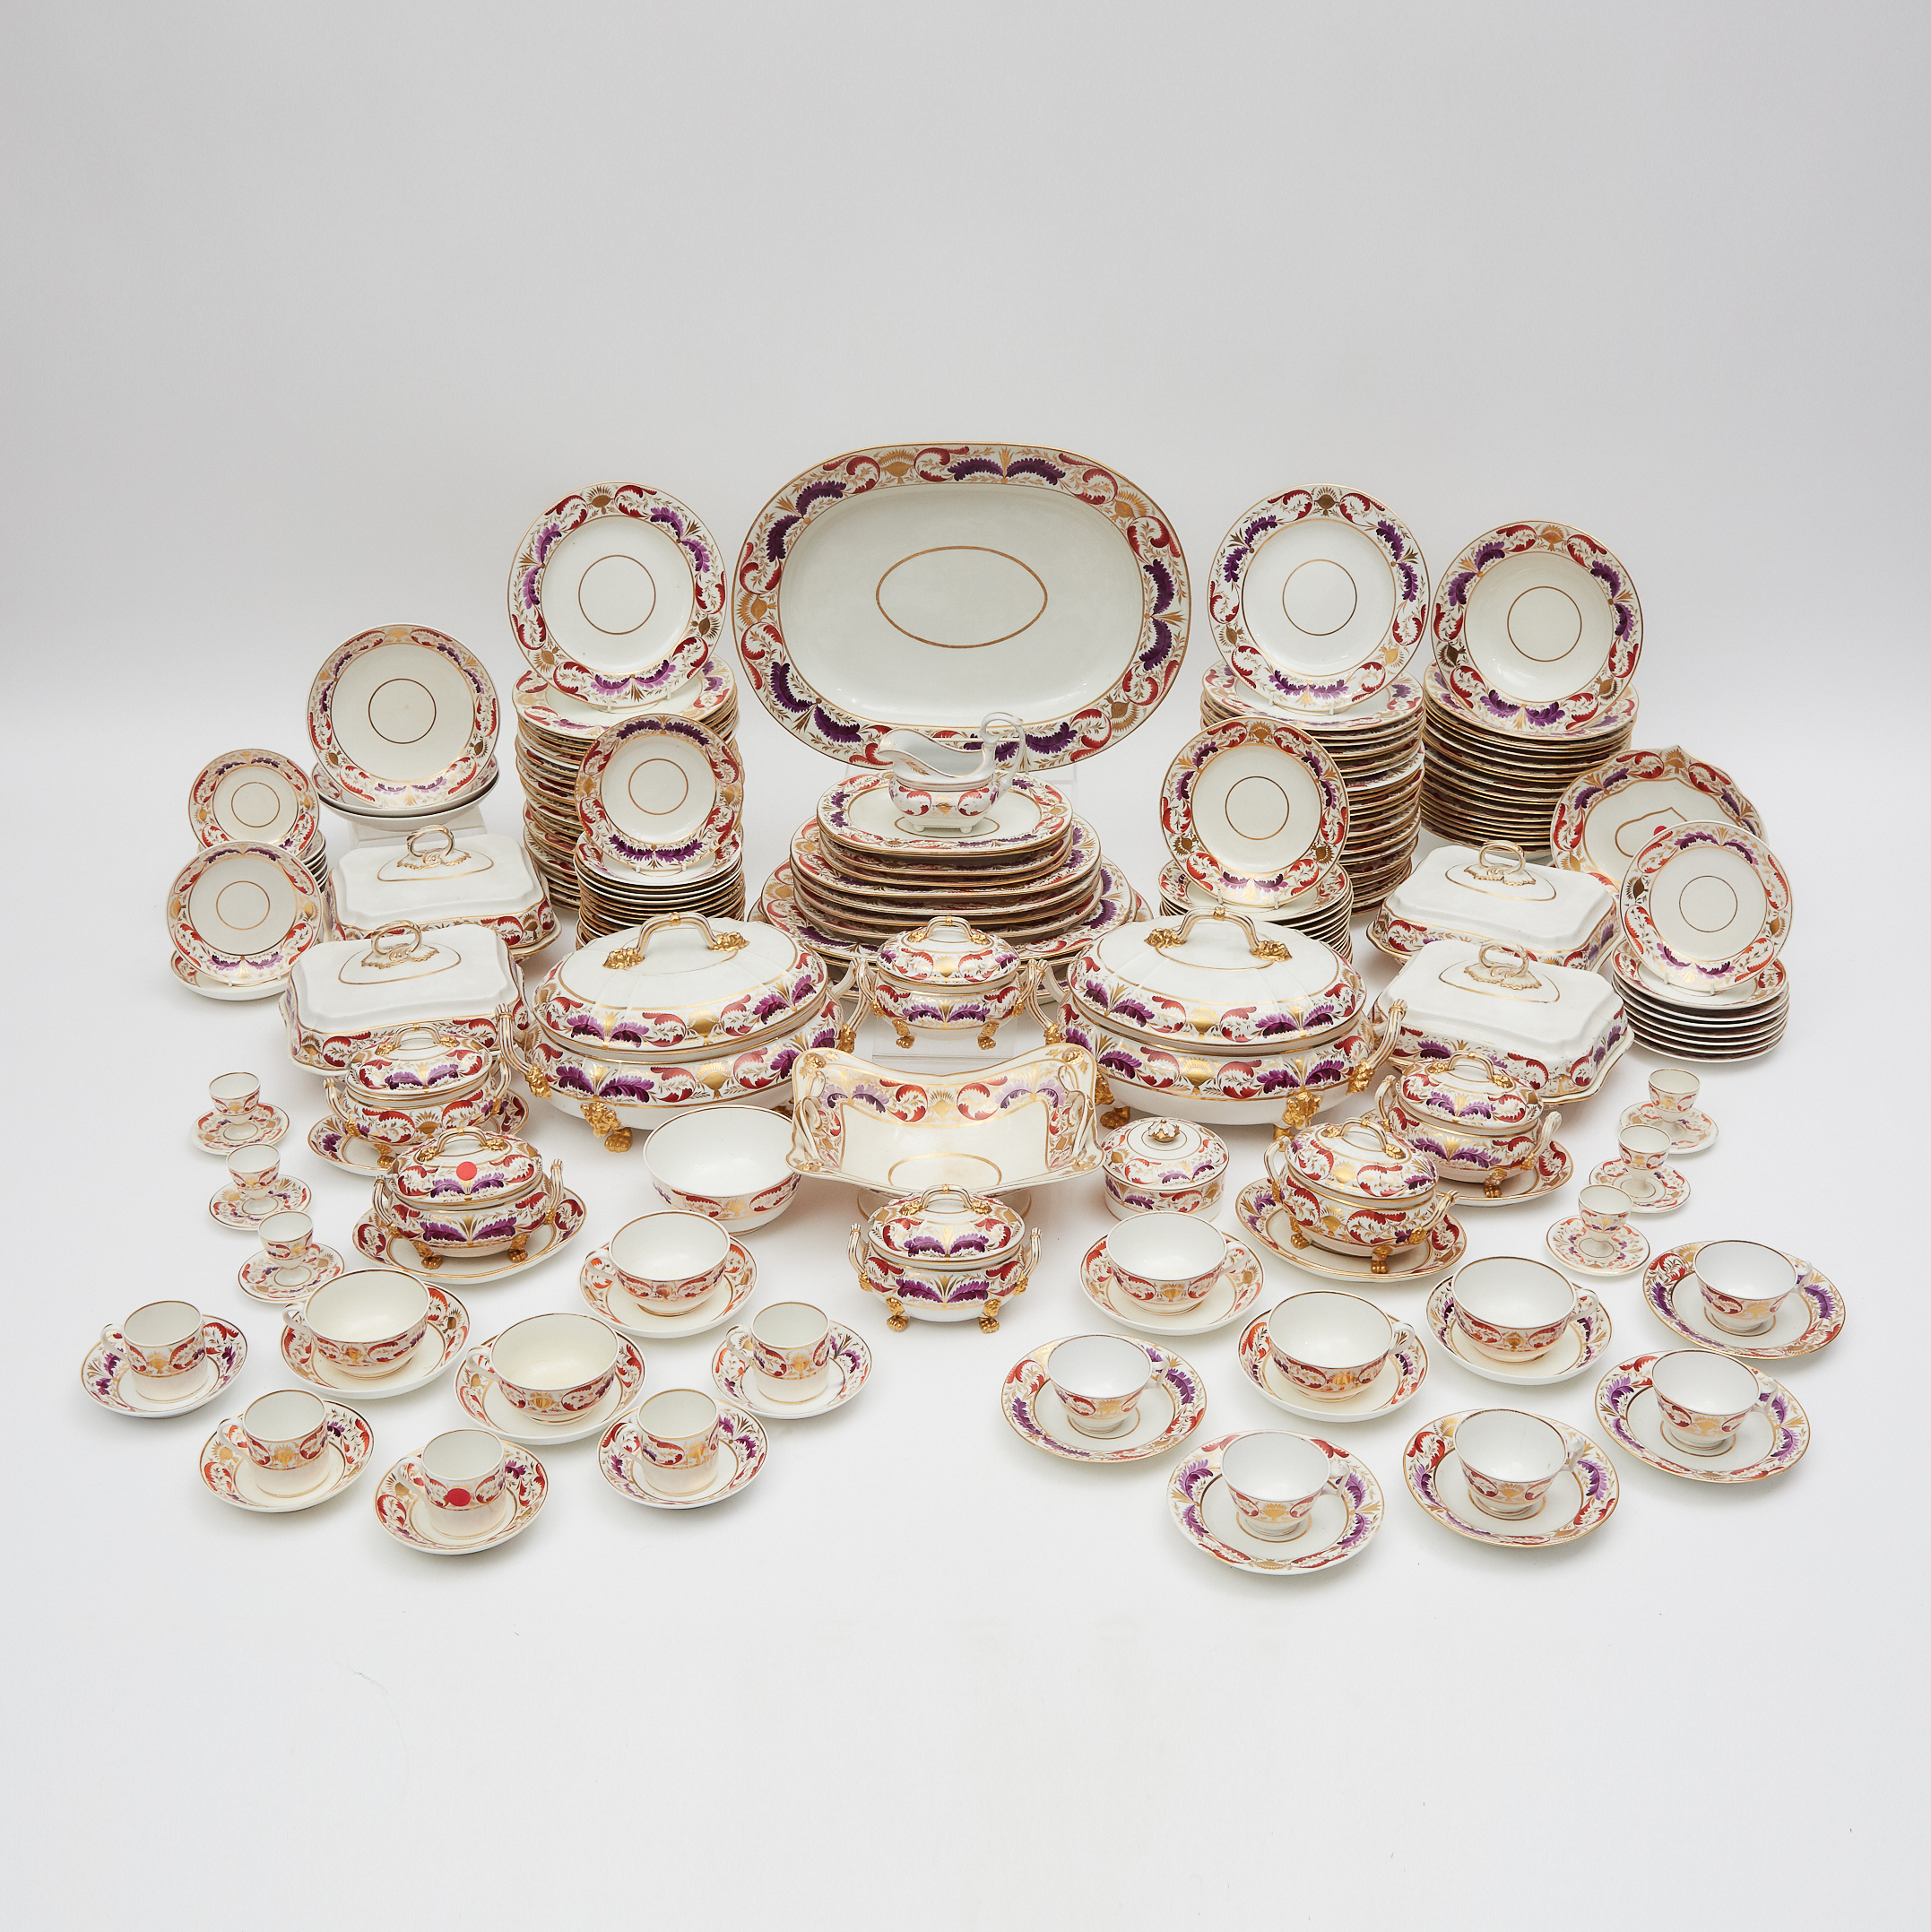 Derby Puce, Red and Gilt Decorated Service, c.1820-25